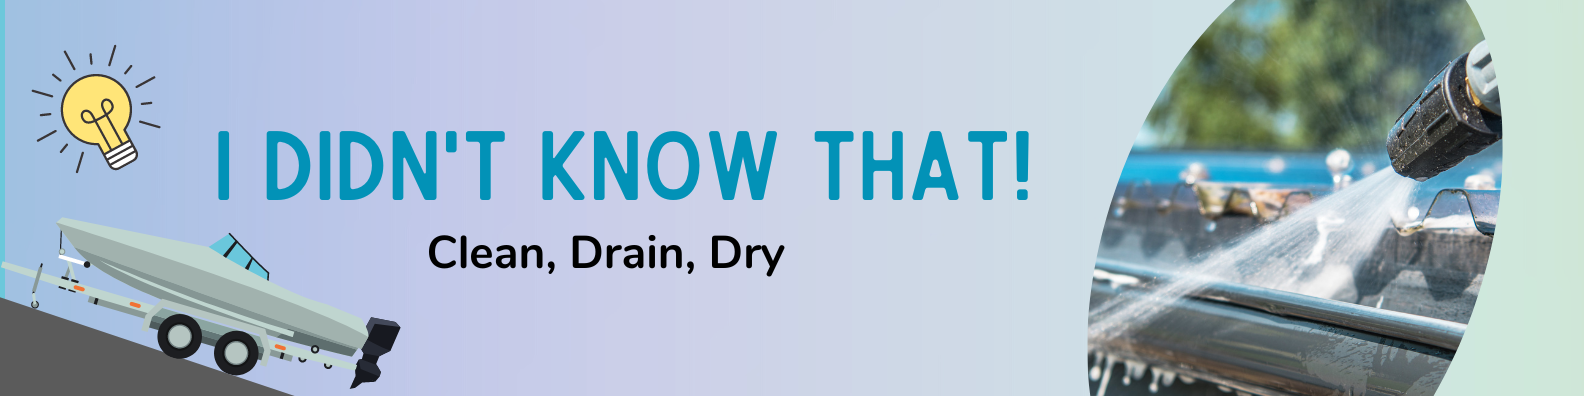 a title image for "I Didn't Know That! Clean, Drain, Dry" with image of a boat and a power washing cleaning a boat